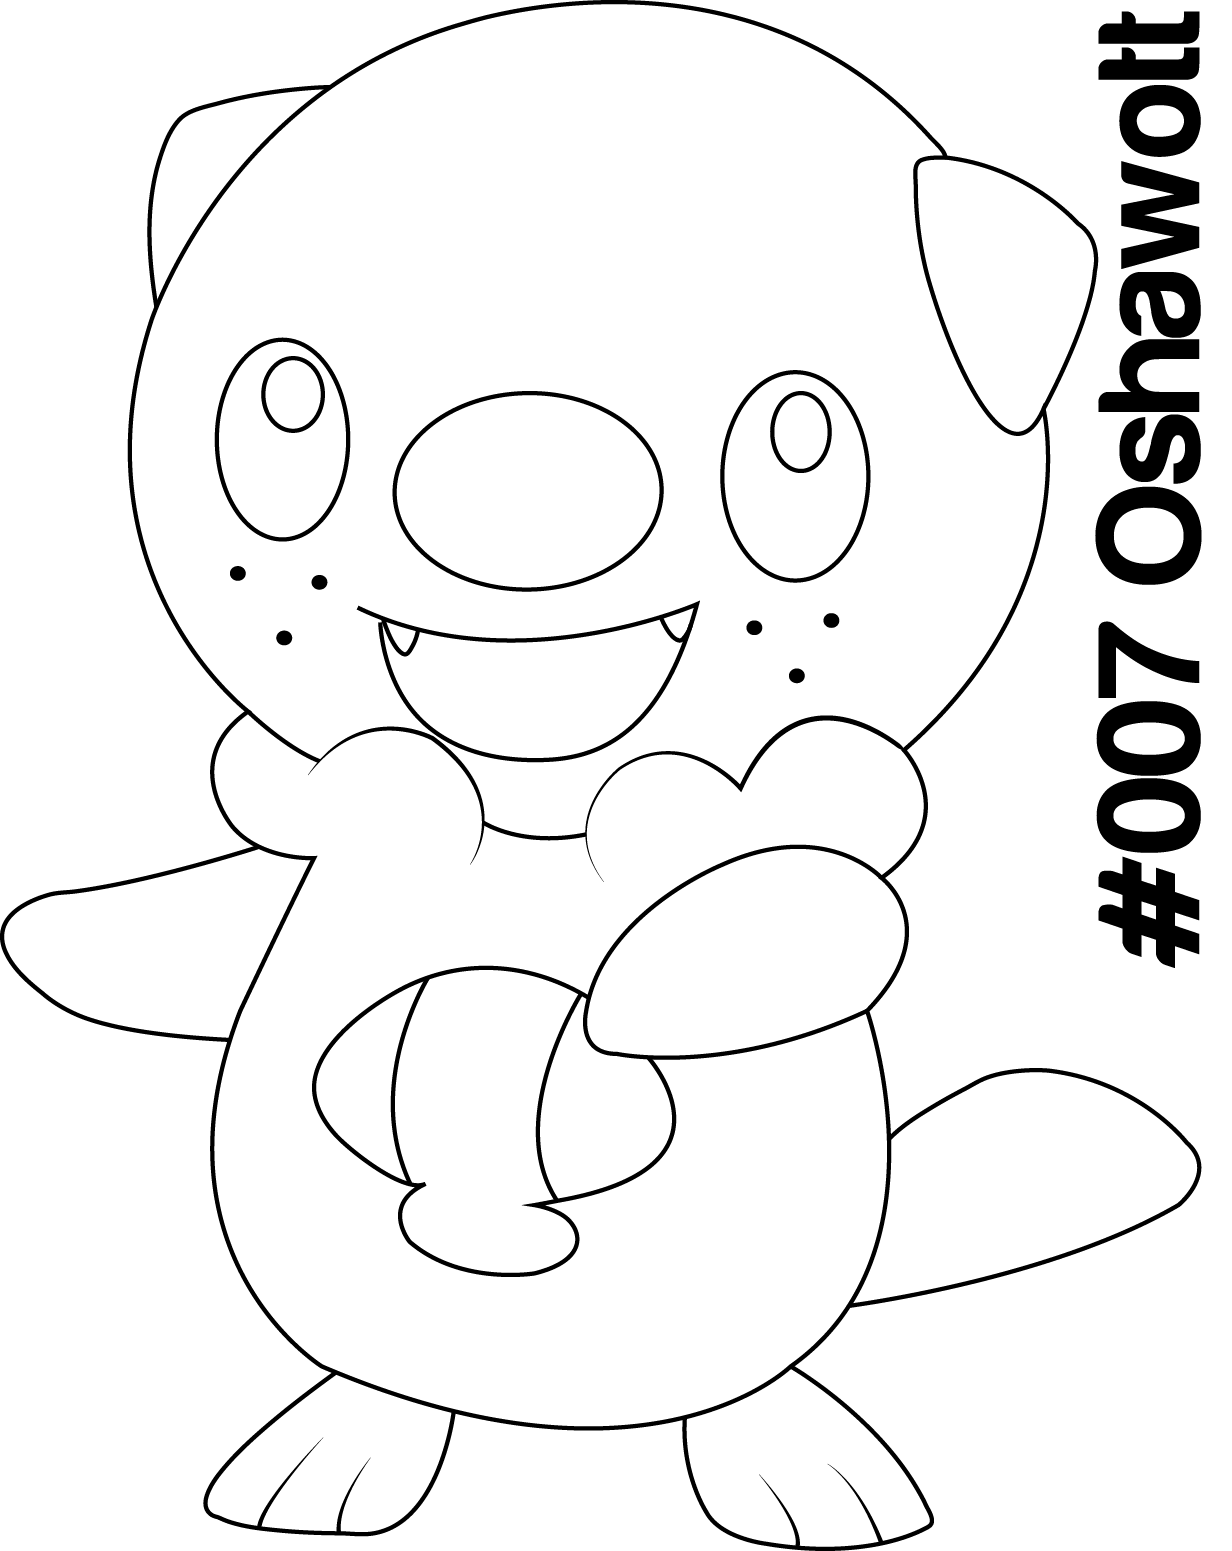 Oshawott Coloring Pages Sketch Coloring Page.